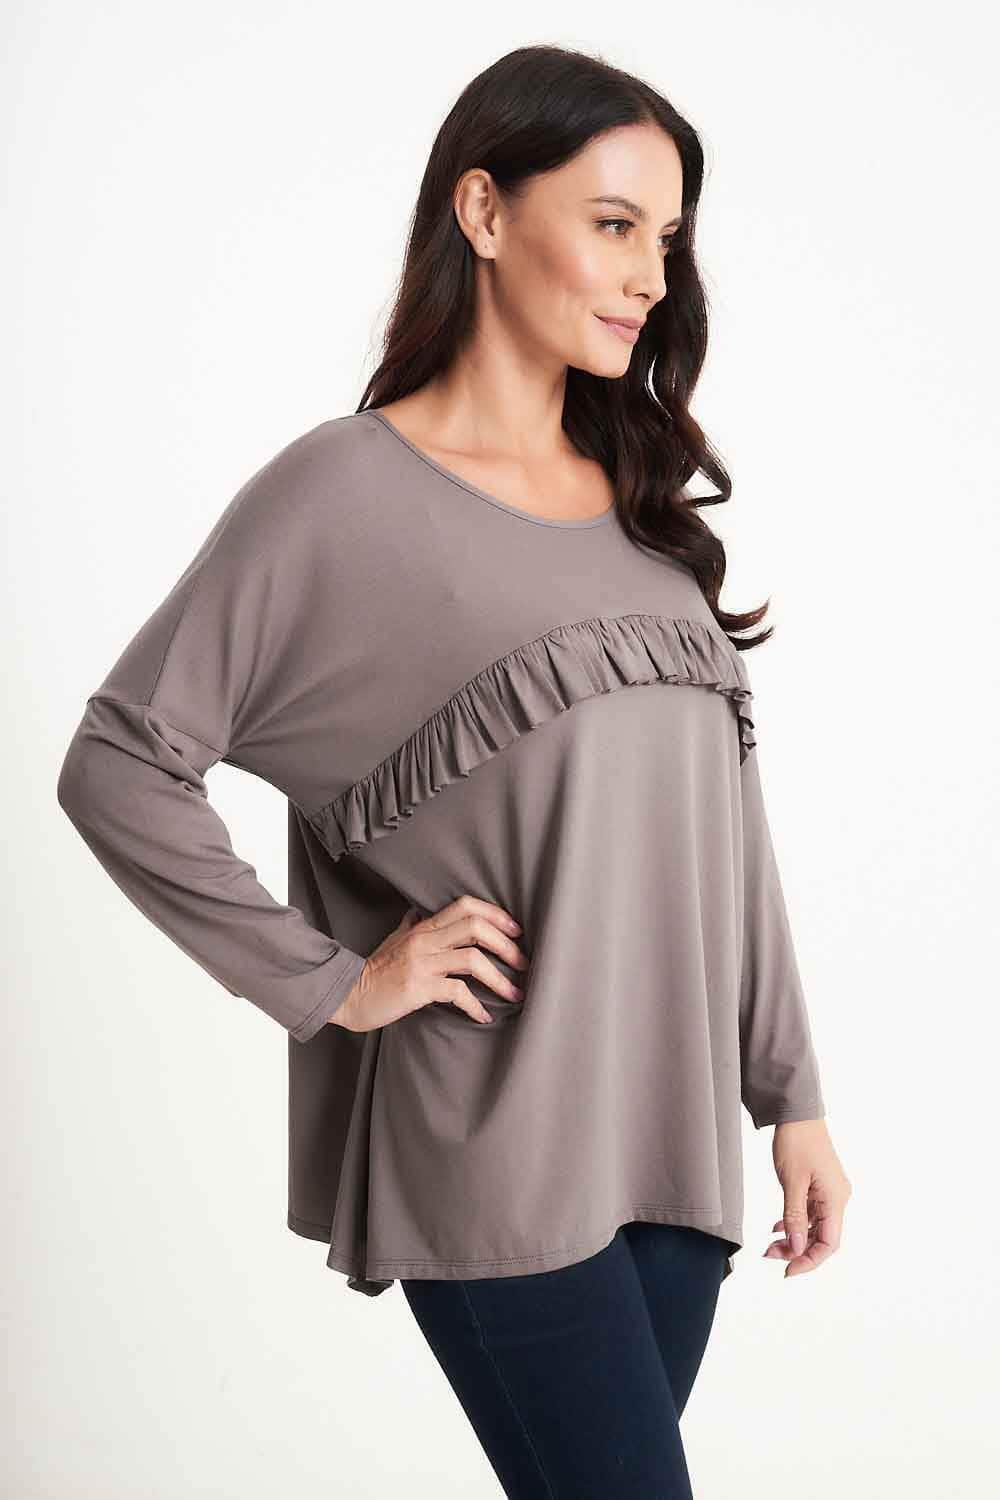 Saloos Top A-Line Short Baby-Doll Top